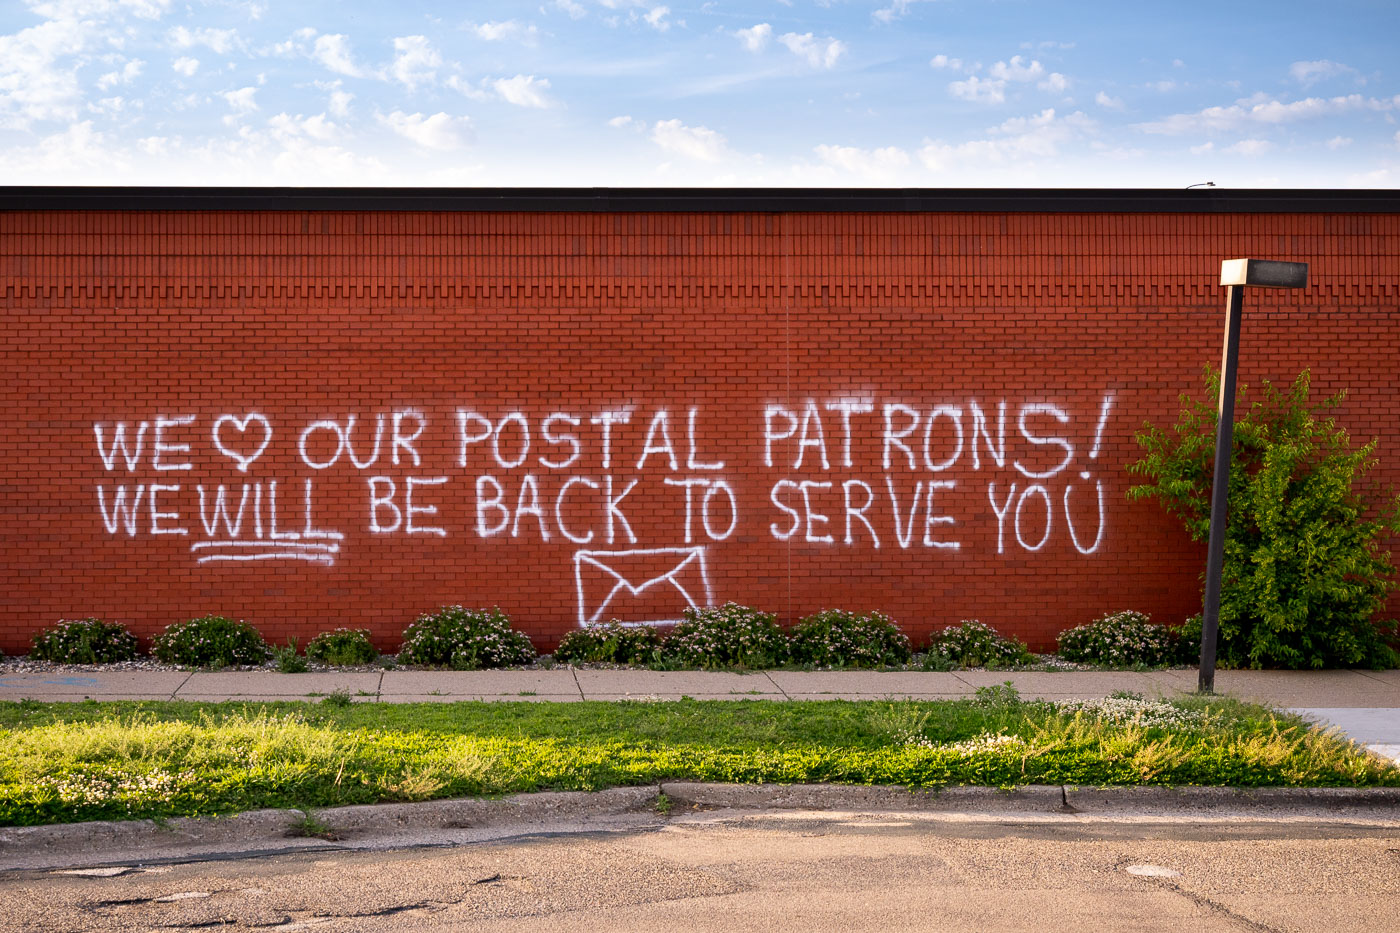 Graffiti on side of post office in South Minneapolis.